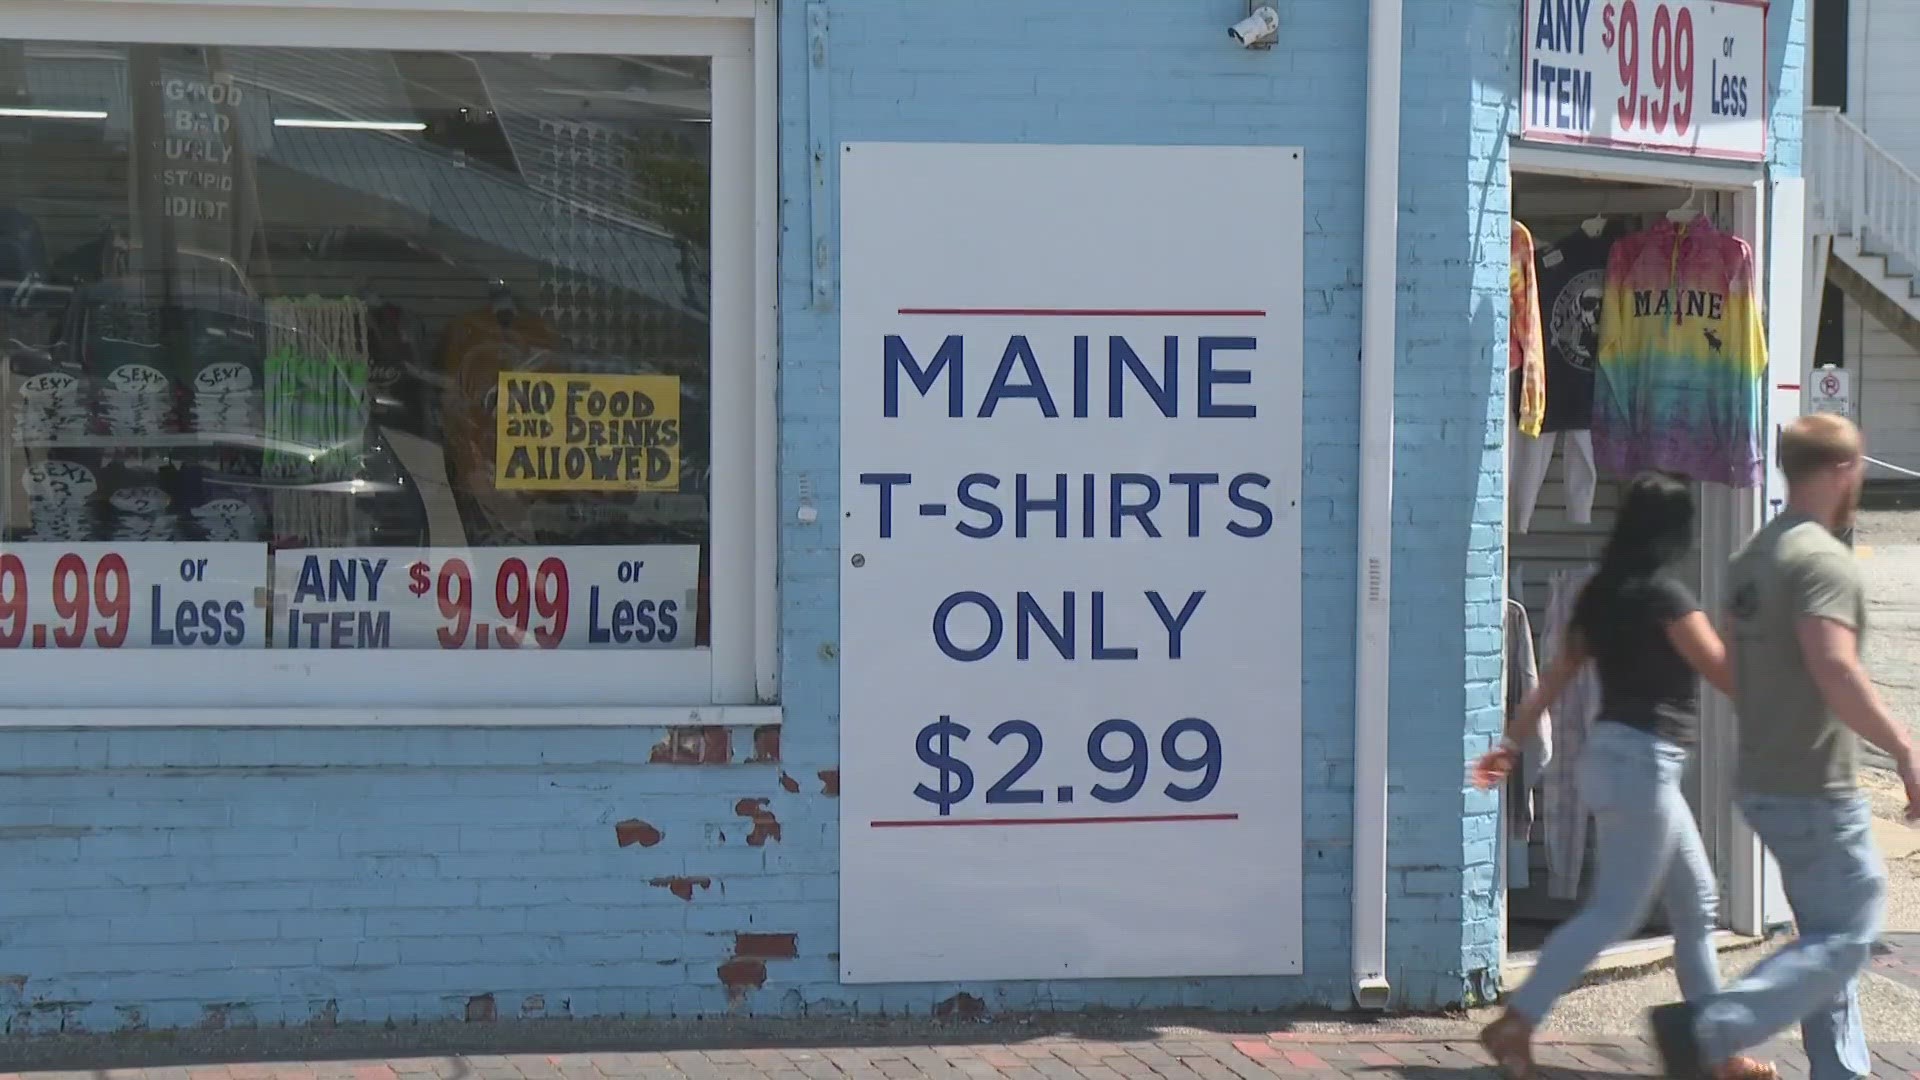 Local Maine businesses said they see Memorial Day Weekend as the kick-off to the summer tourism season.